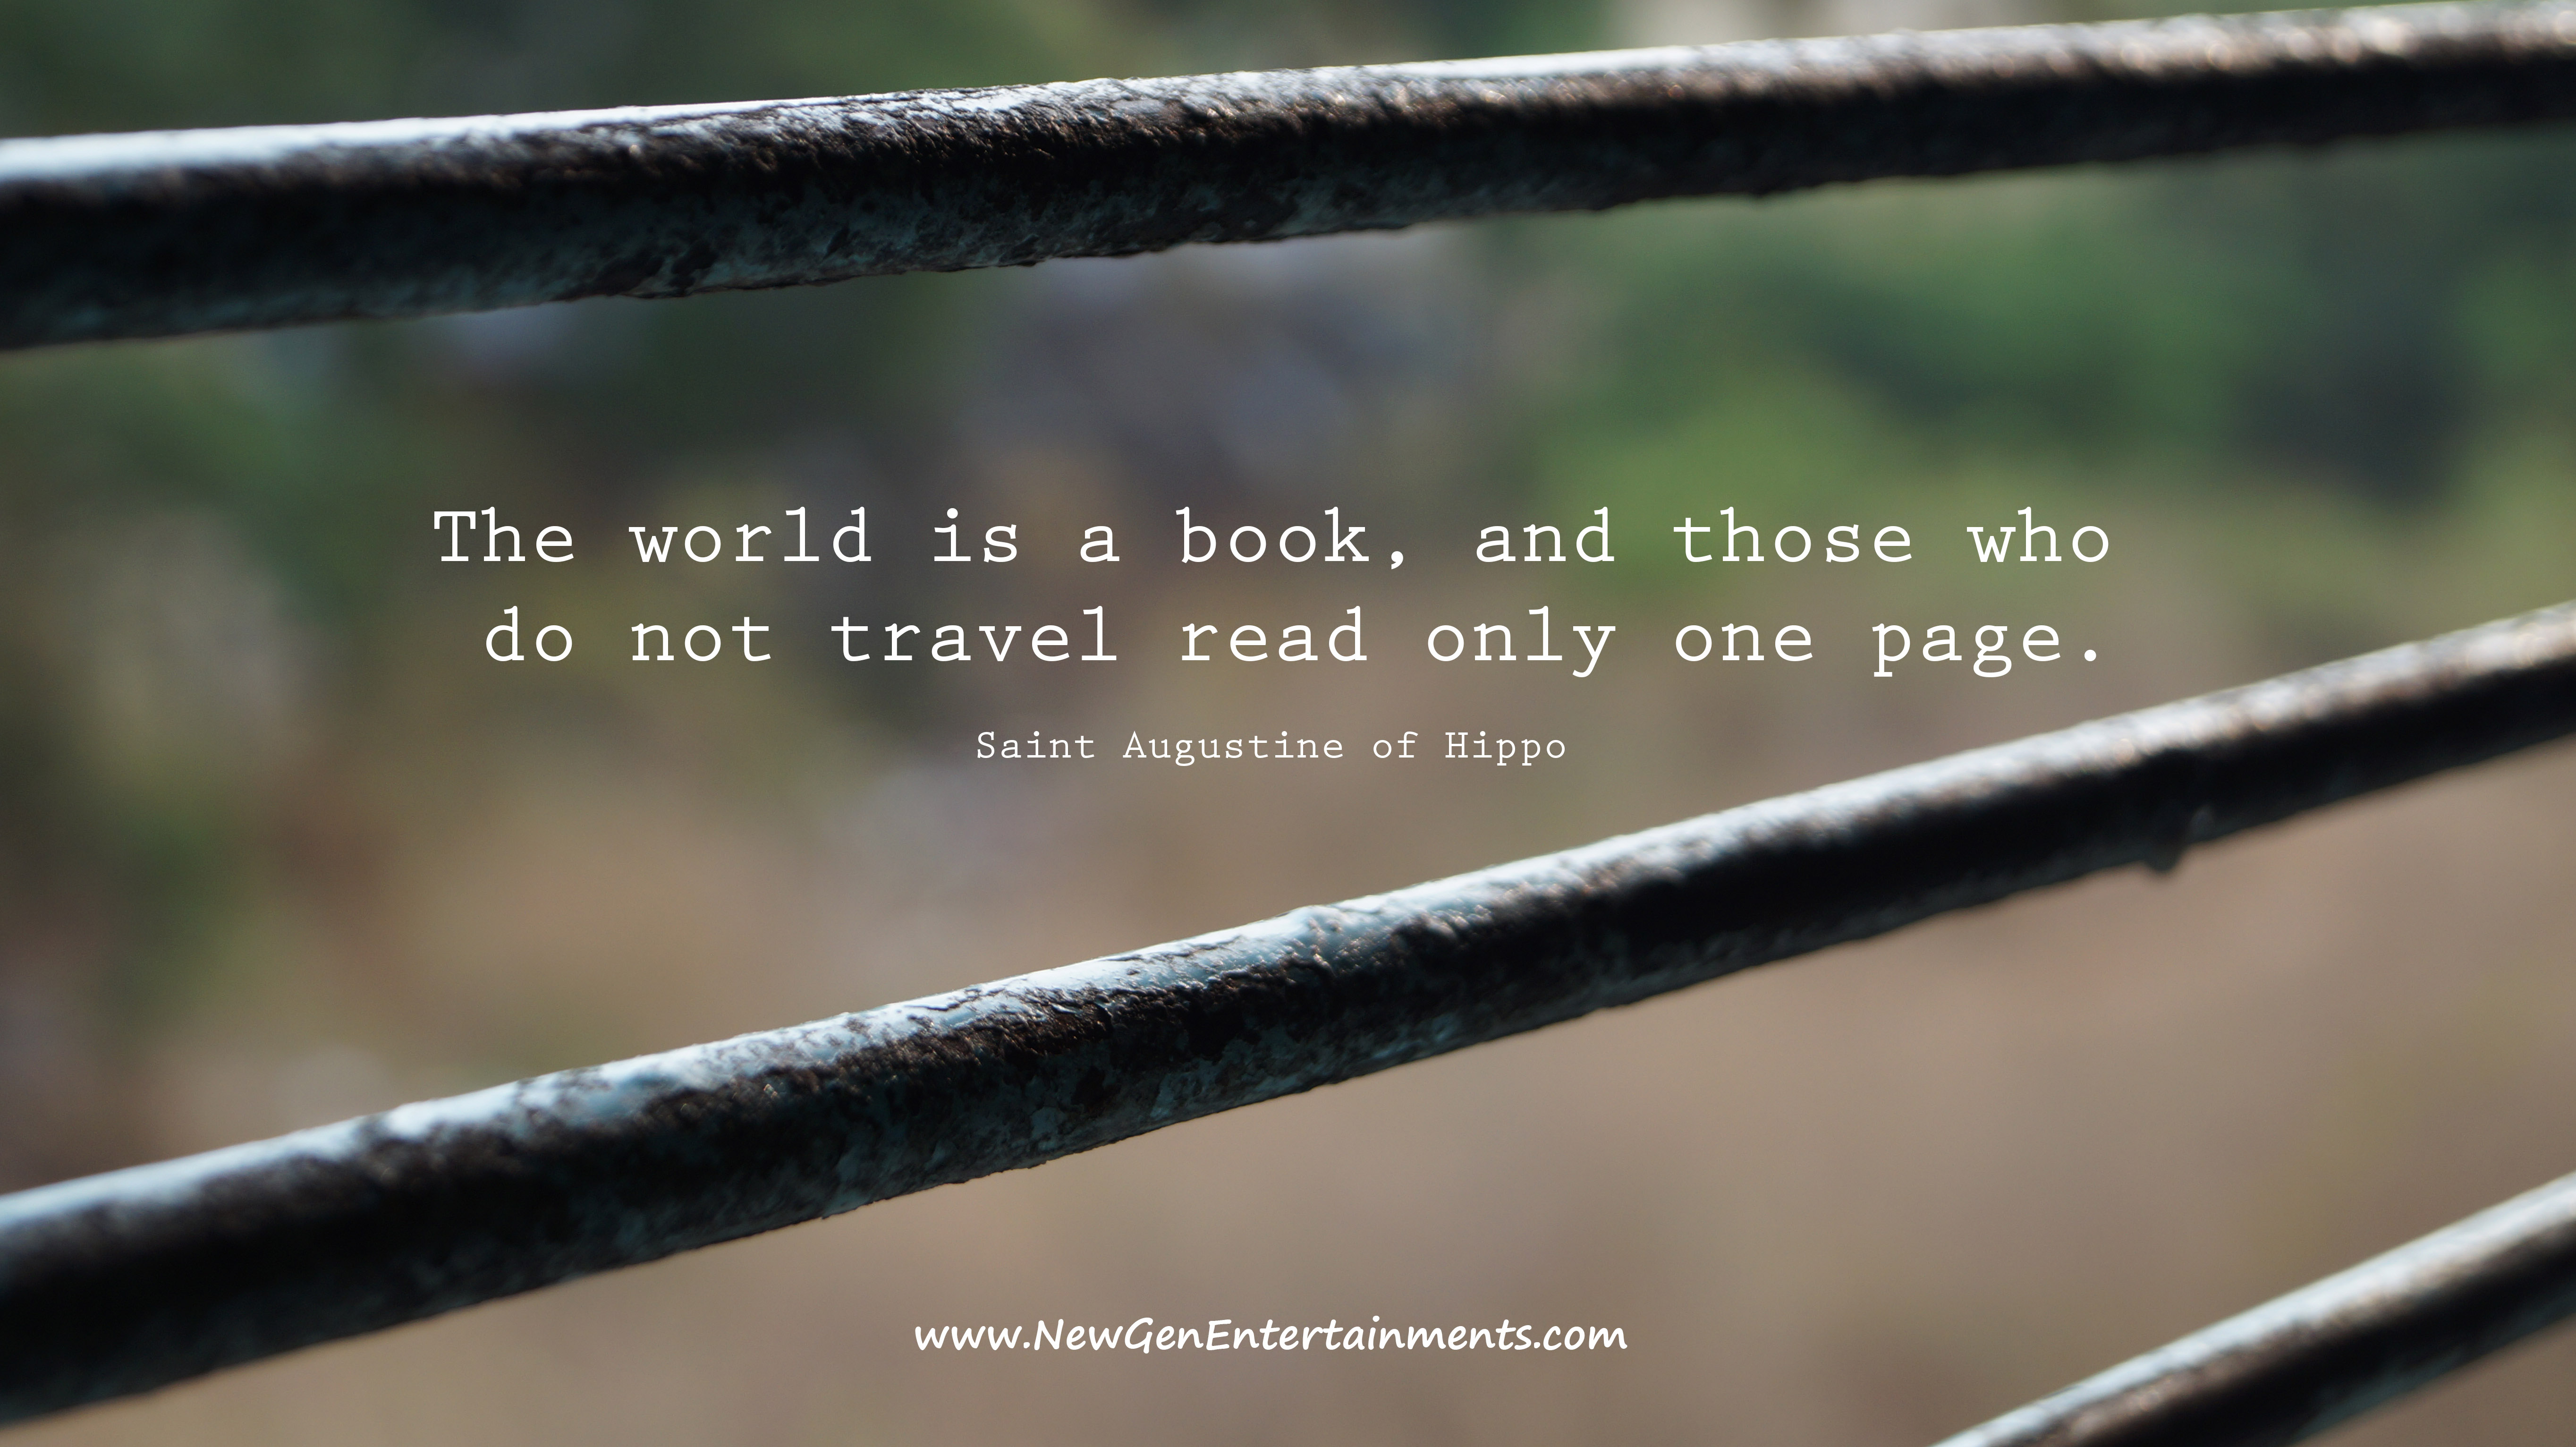 The world is a book, and those who do not travel read only one page